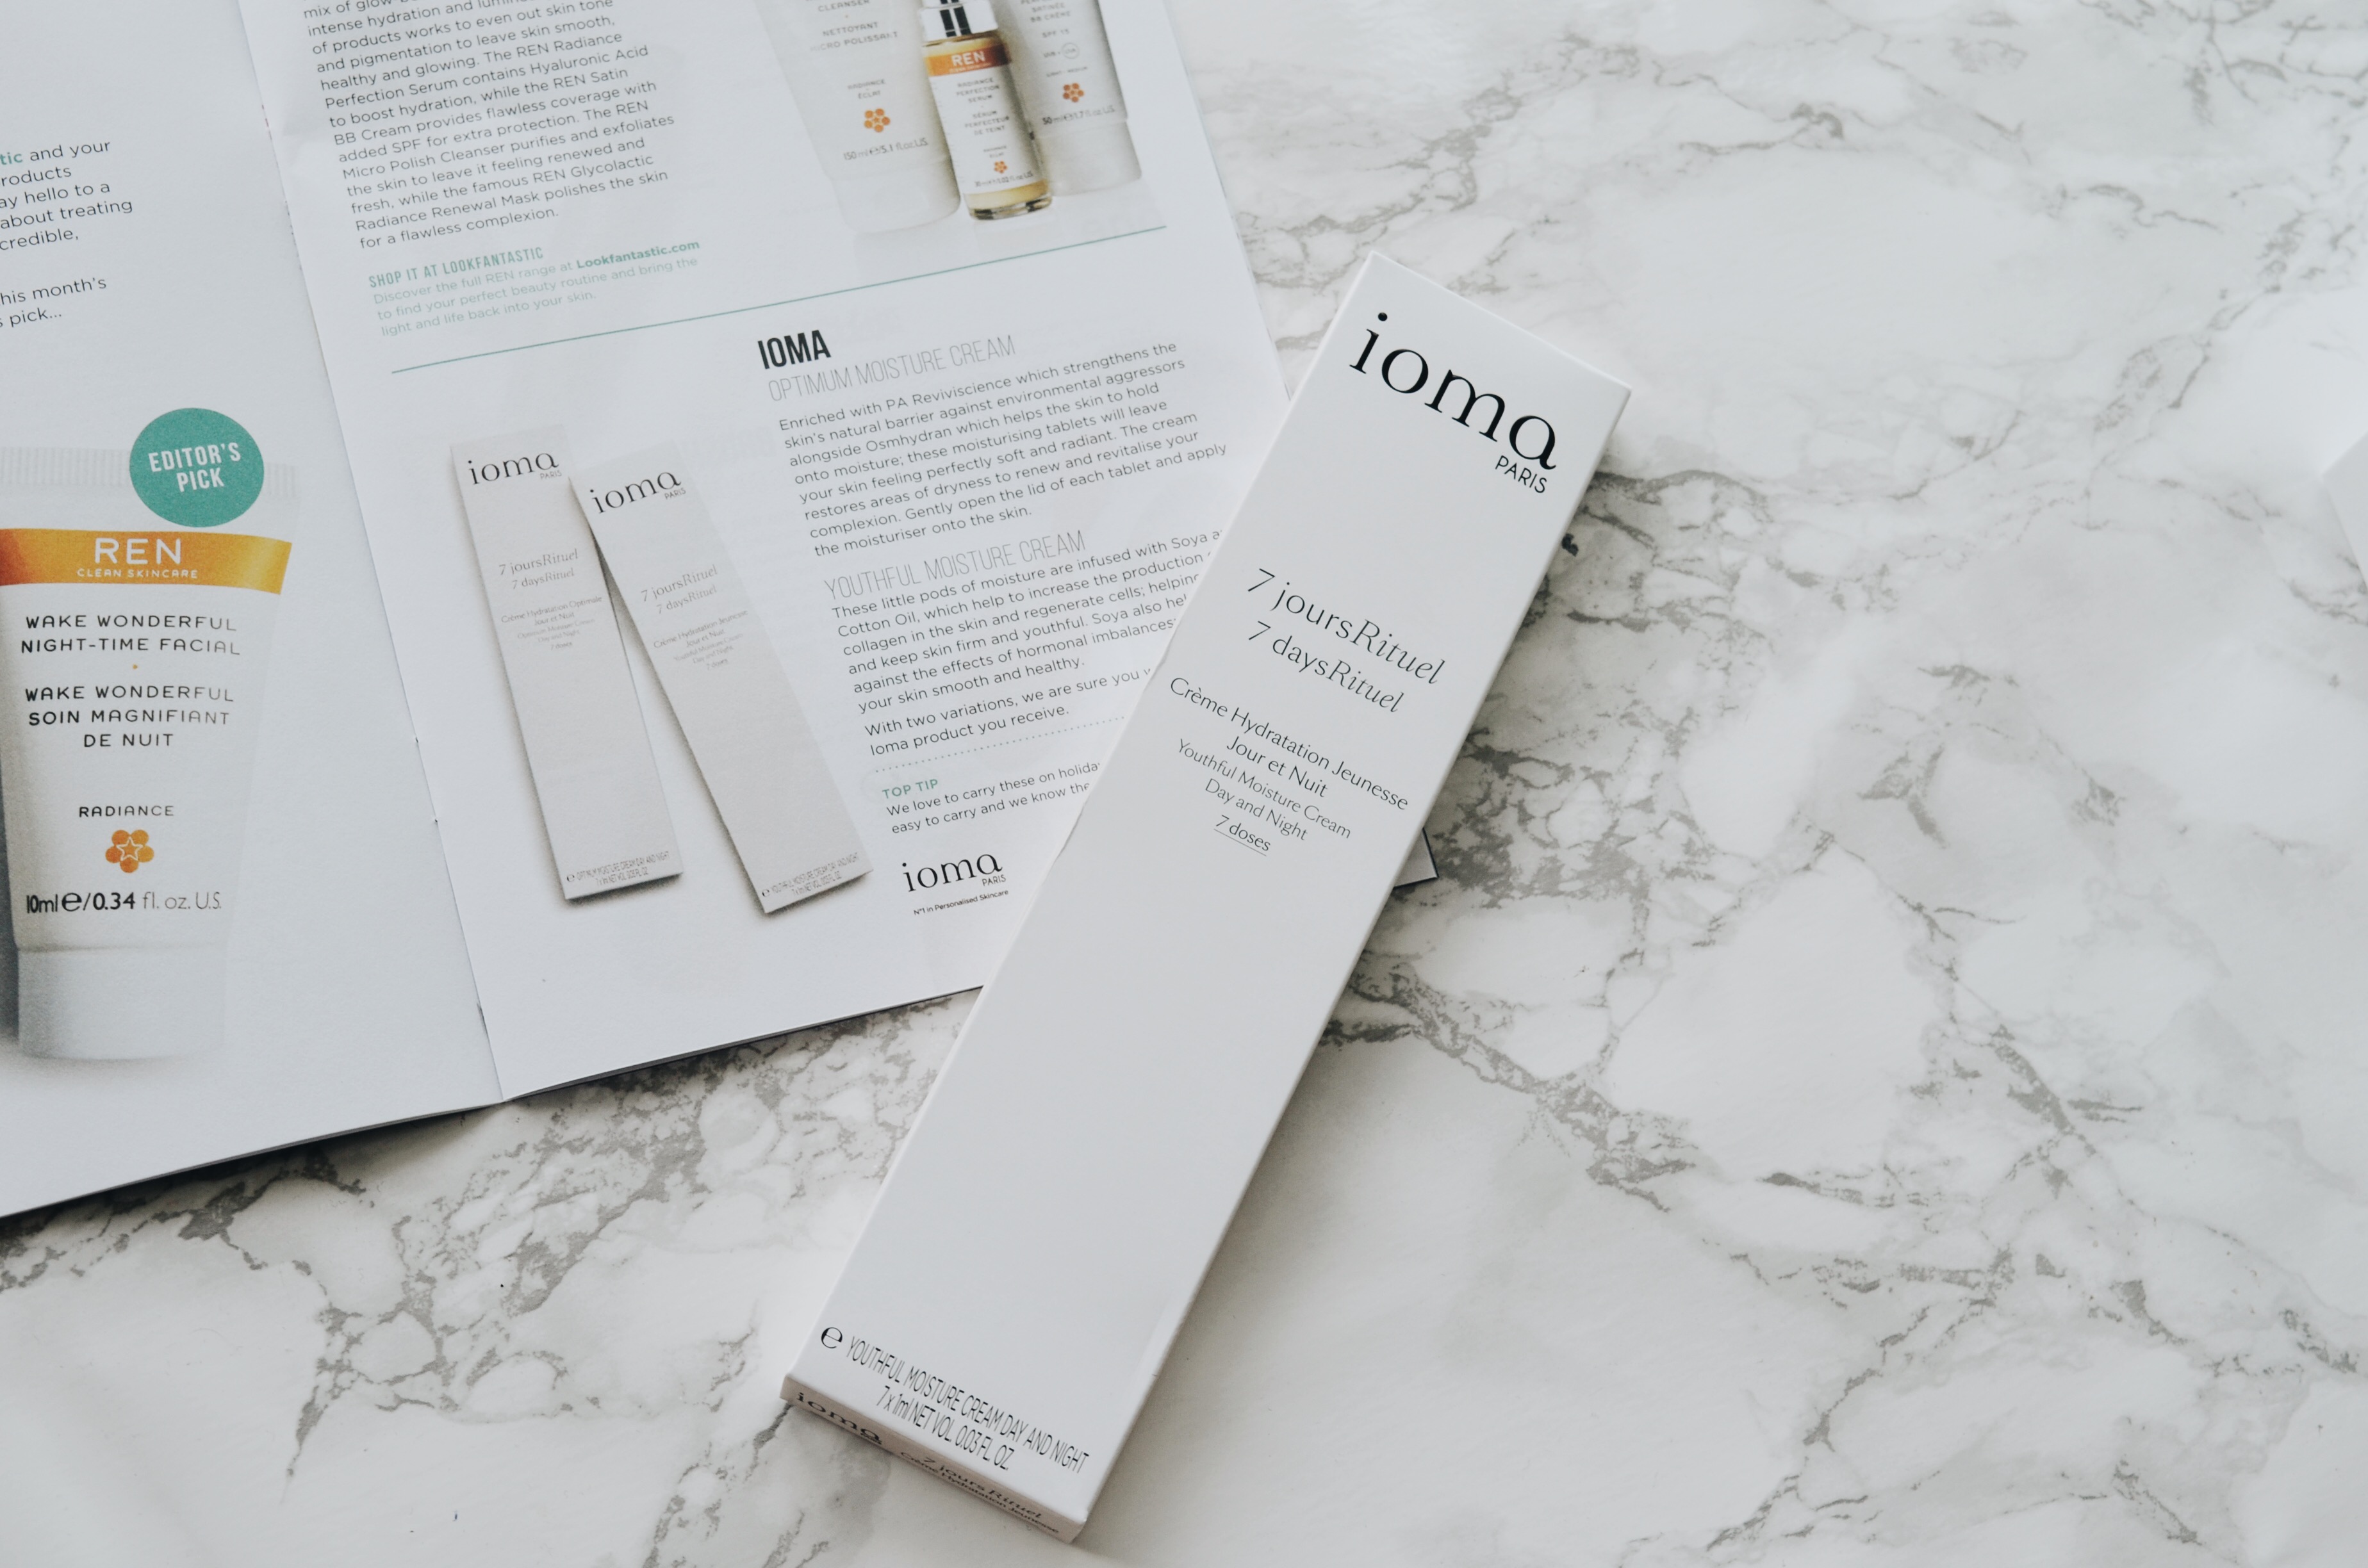 3. IOMA Youthful Moisture Cream Day and Night Tabs 7 x 1ml | RRP £9.00